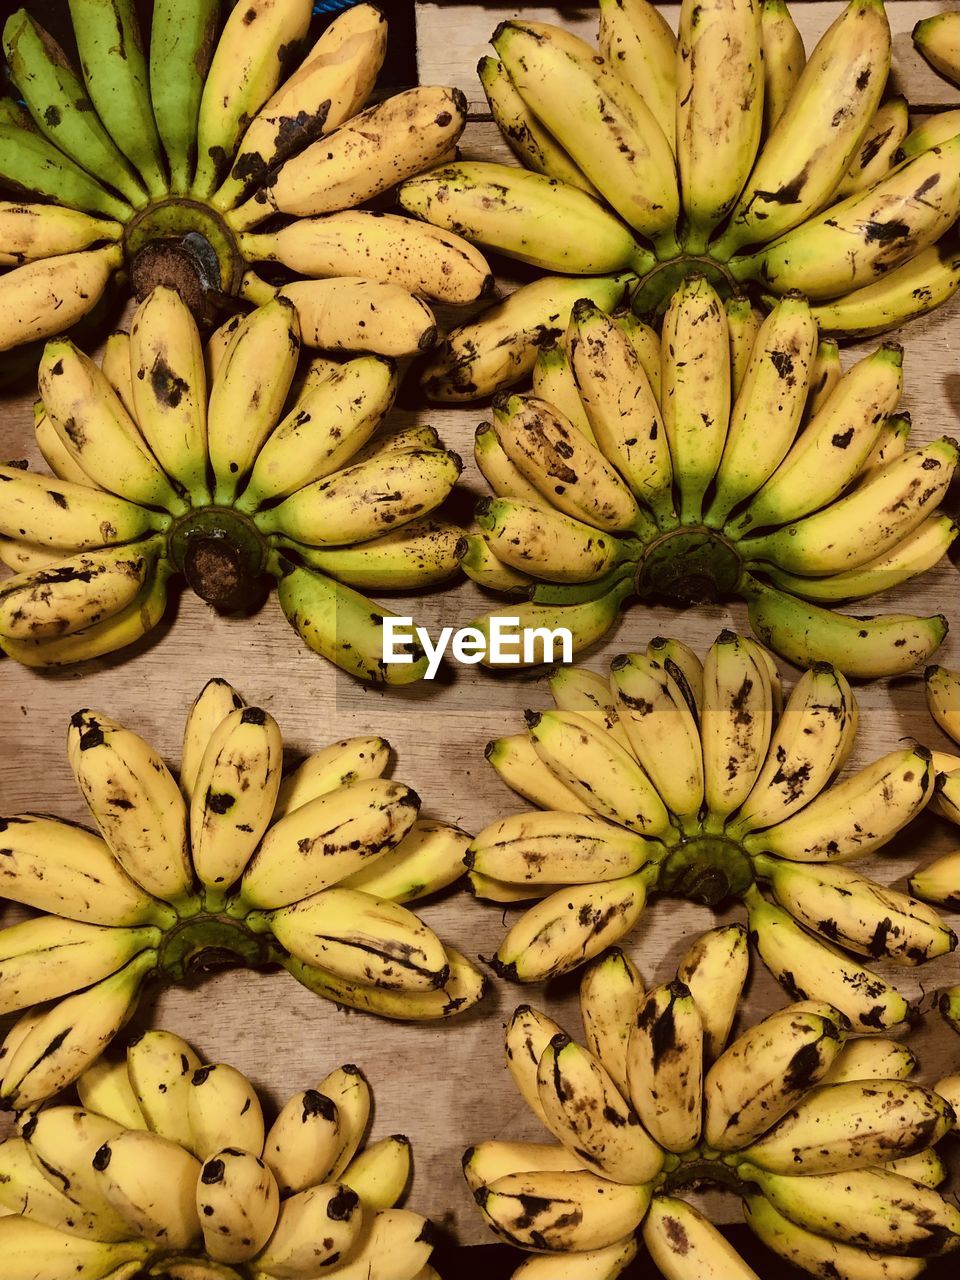 freshness, healthy eating, food and drink, food, plant, produce, banana, fruit, wellbeing, no people, full frame, flower, cooking plantain, green, close-up, backgrounds, yellow, large group of objects, directly above, abundance, tropical fruit